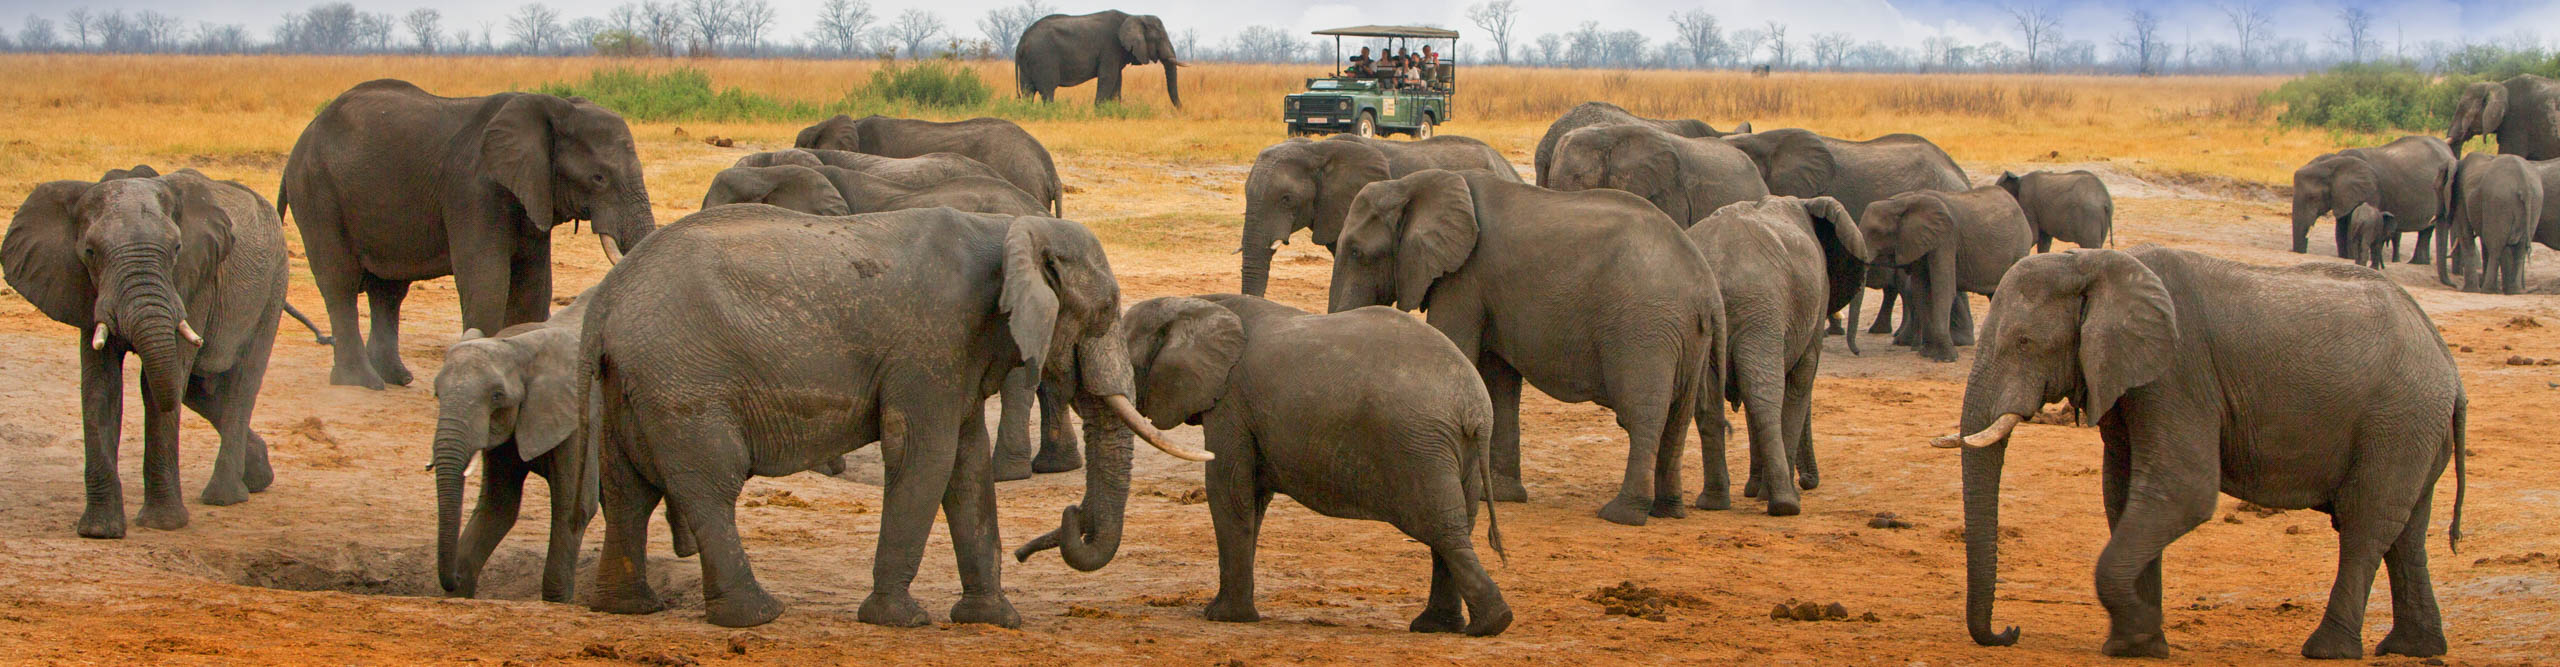 Herd of elephants on the open plains in Hwange national park with a tourist truck, Zimbabwe